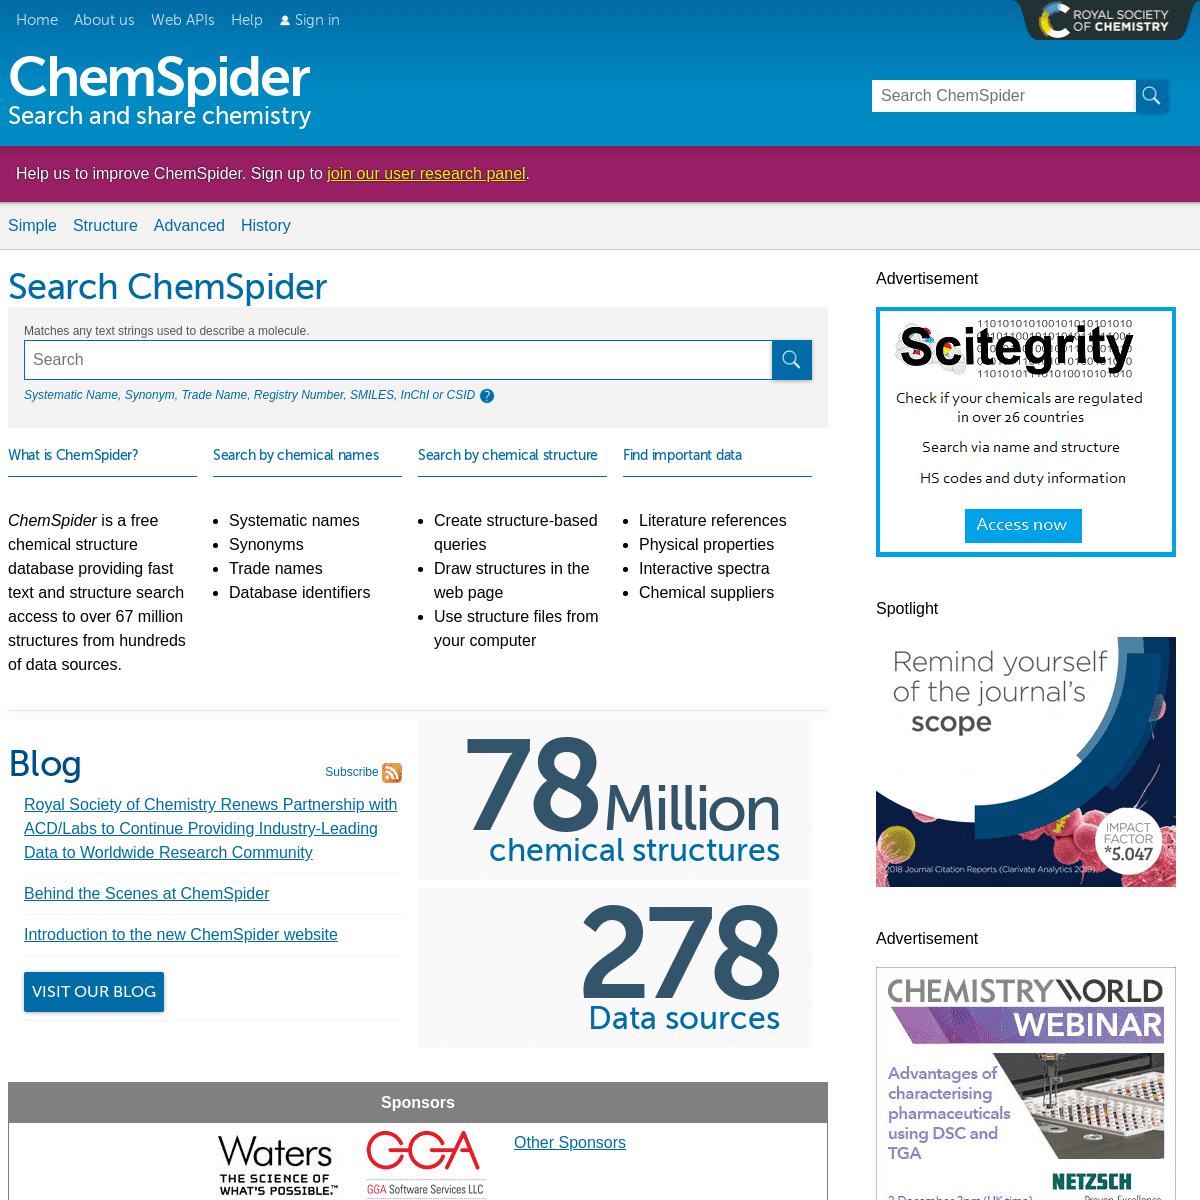 A complete backup of chemspider.com